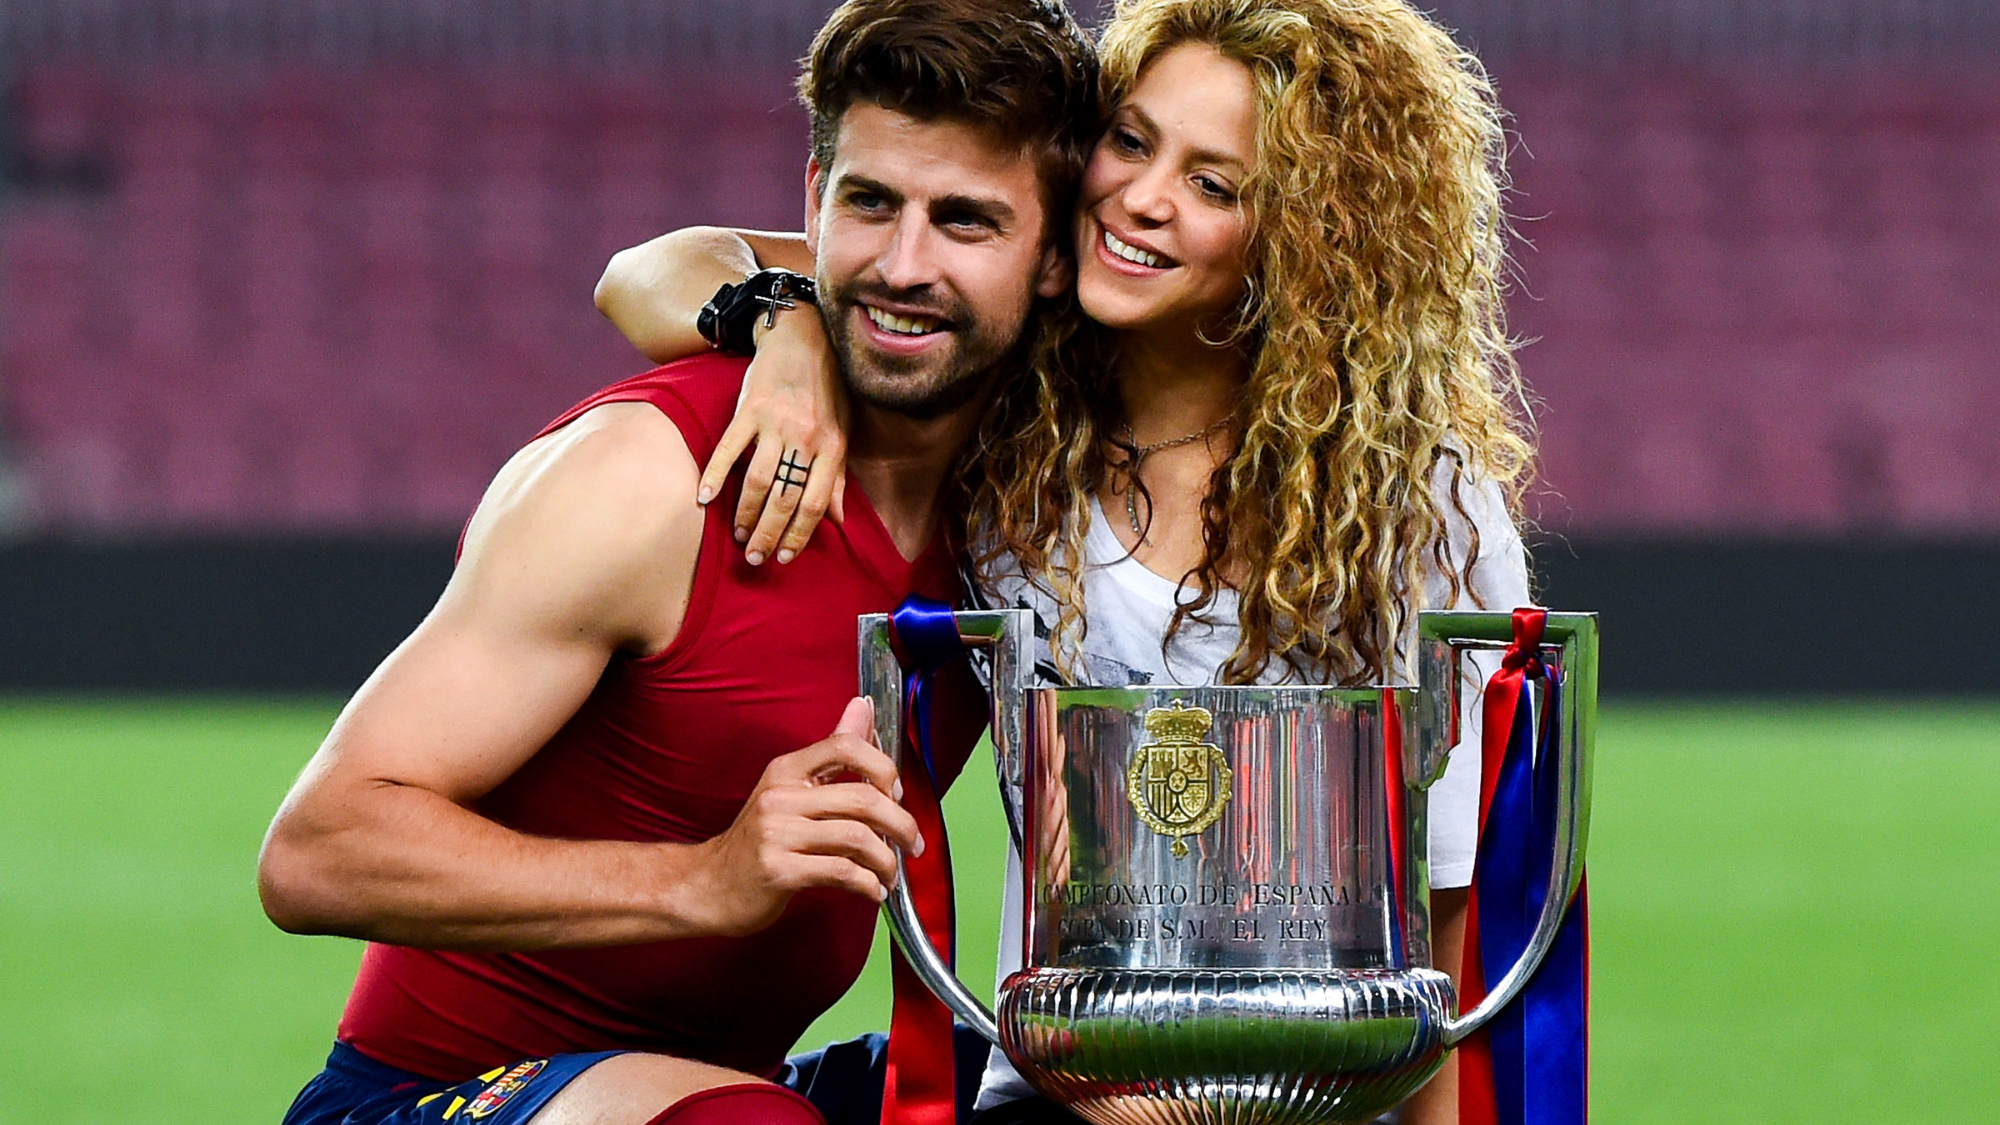 Shakira And Piqué's Body Language, Explained By An Expert